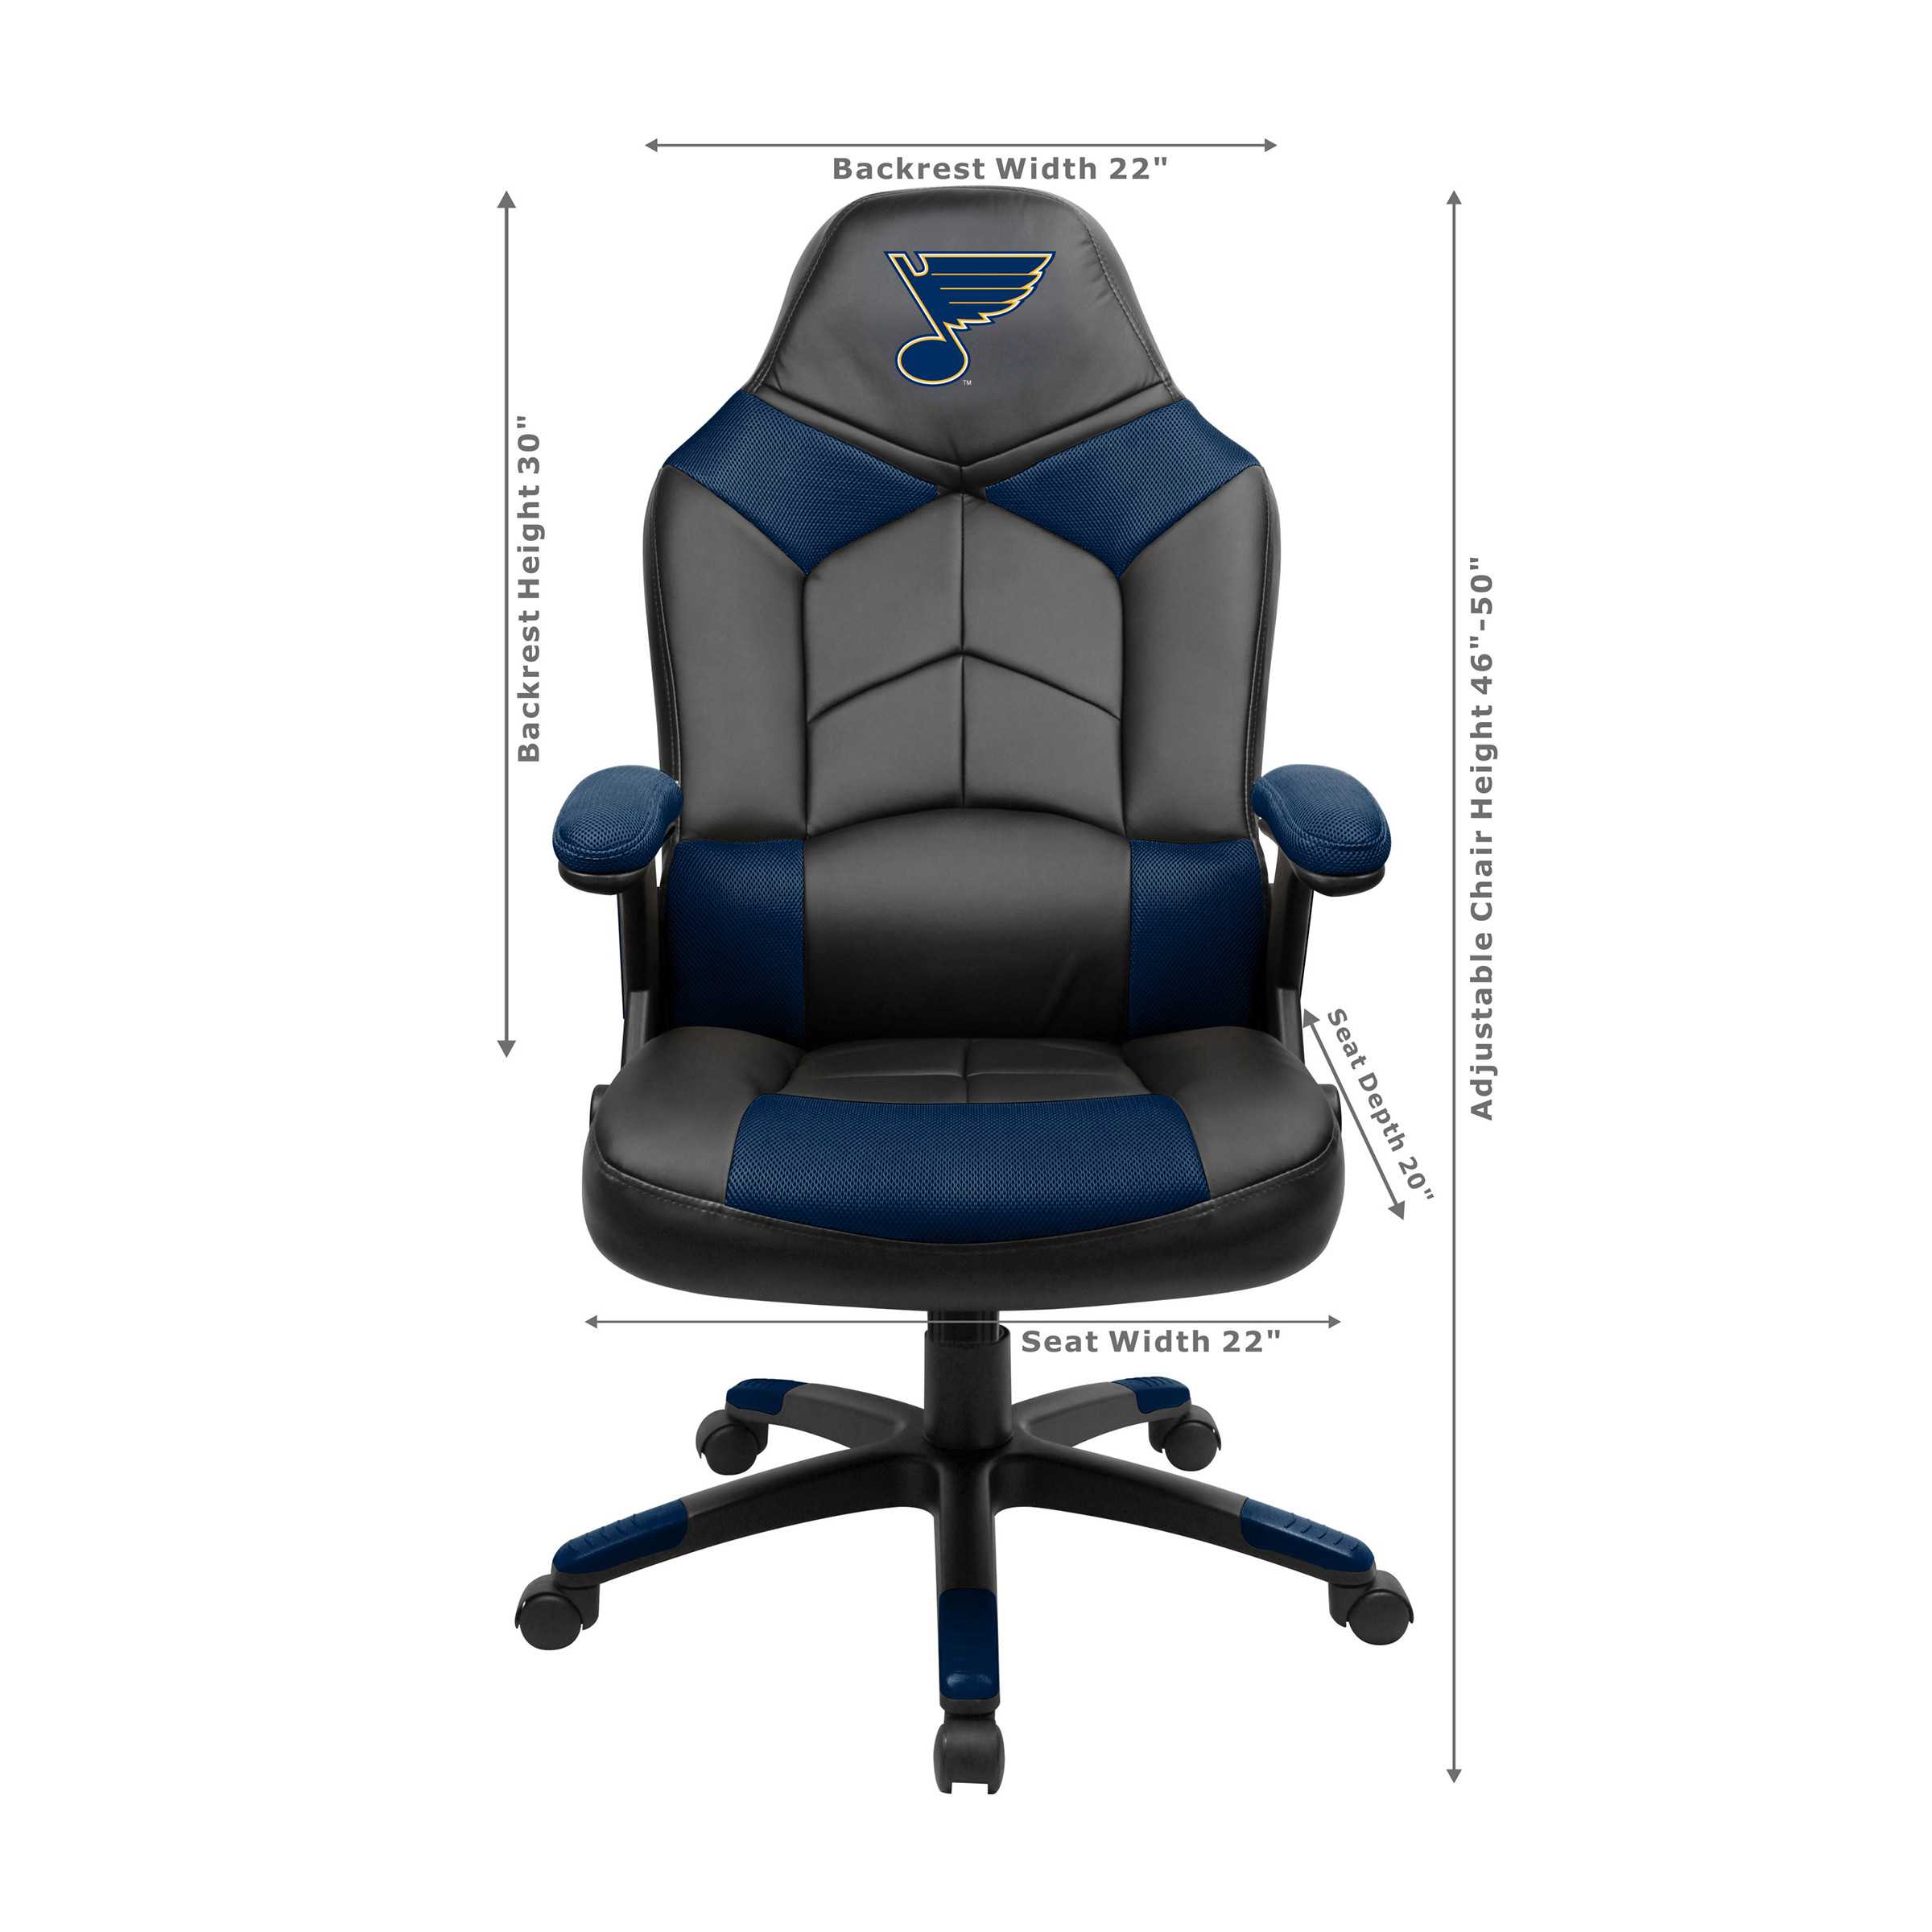 ST LOUIS BLUES OVERSIZED GAME CHAIR